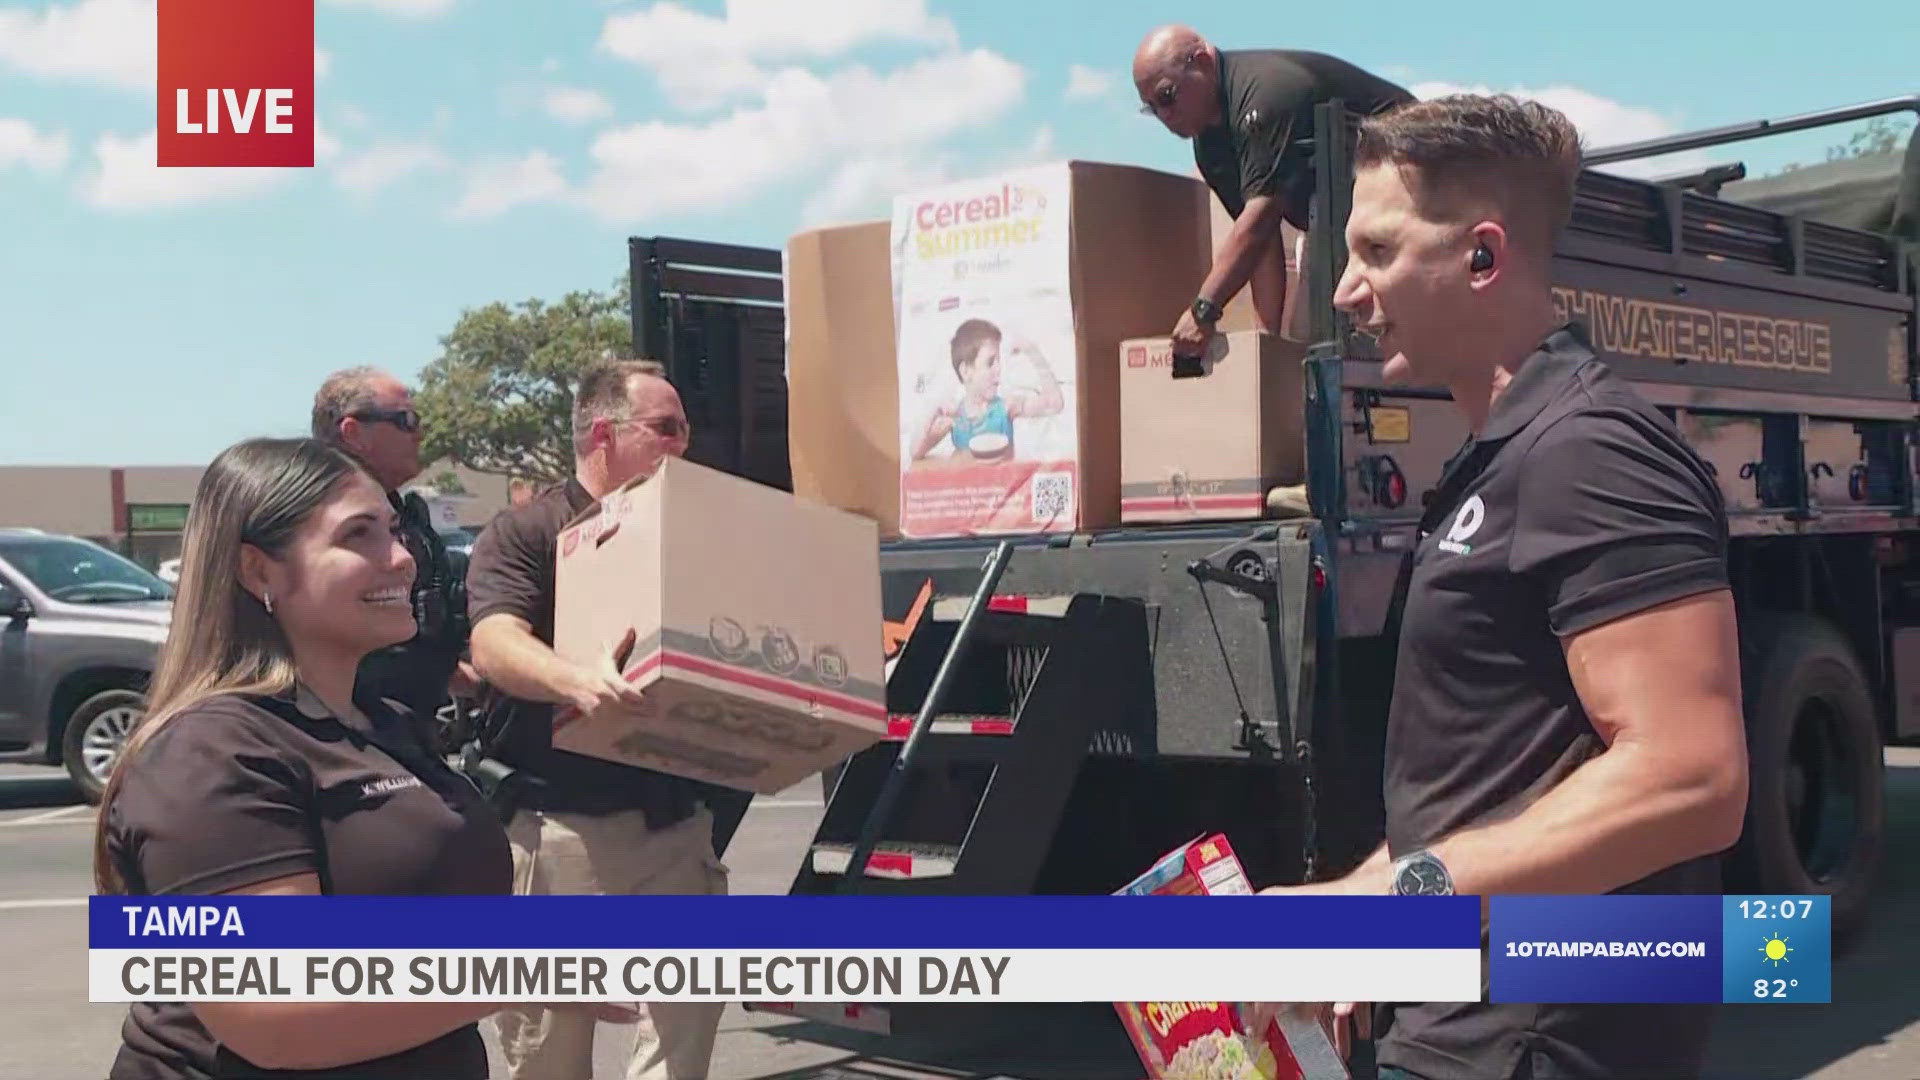 For the Cereal for Summer drive, you can drop off cereal donations at Sonny’s BBQ restaurants, Achieva Credit Union locations, most Goodwill stores and our studio.